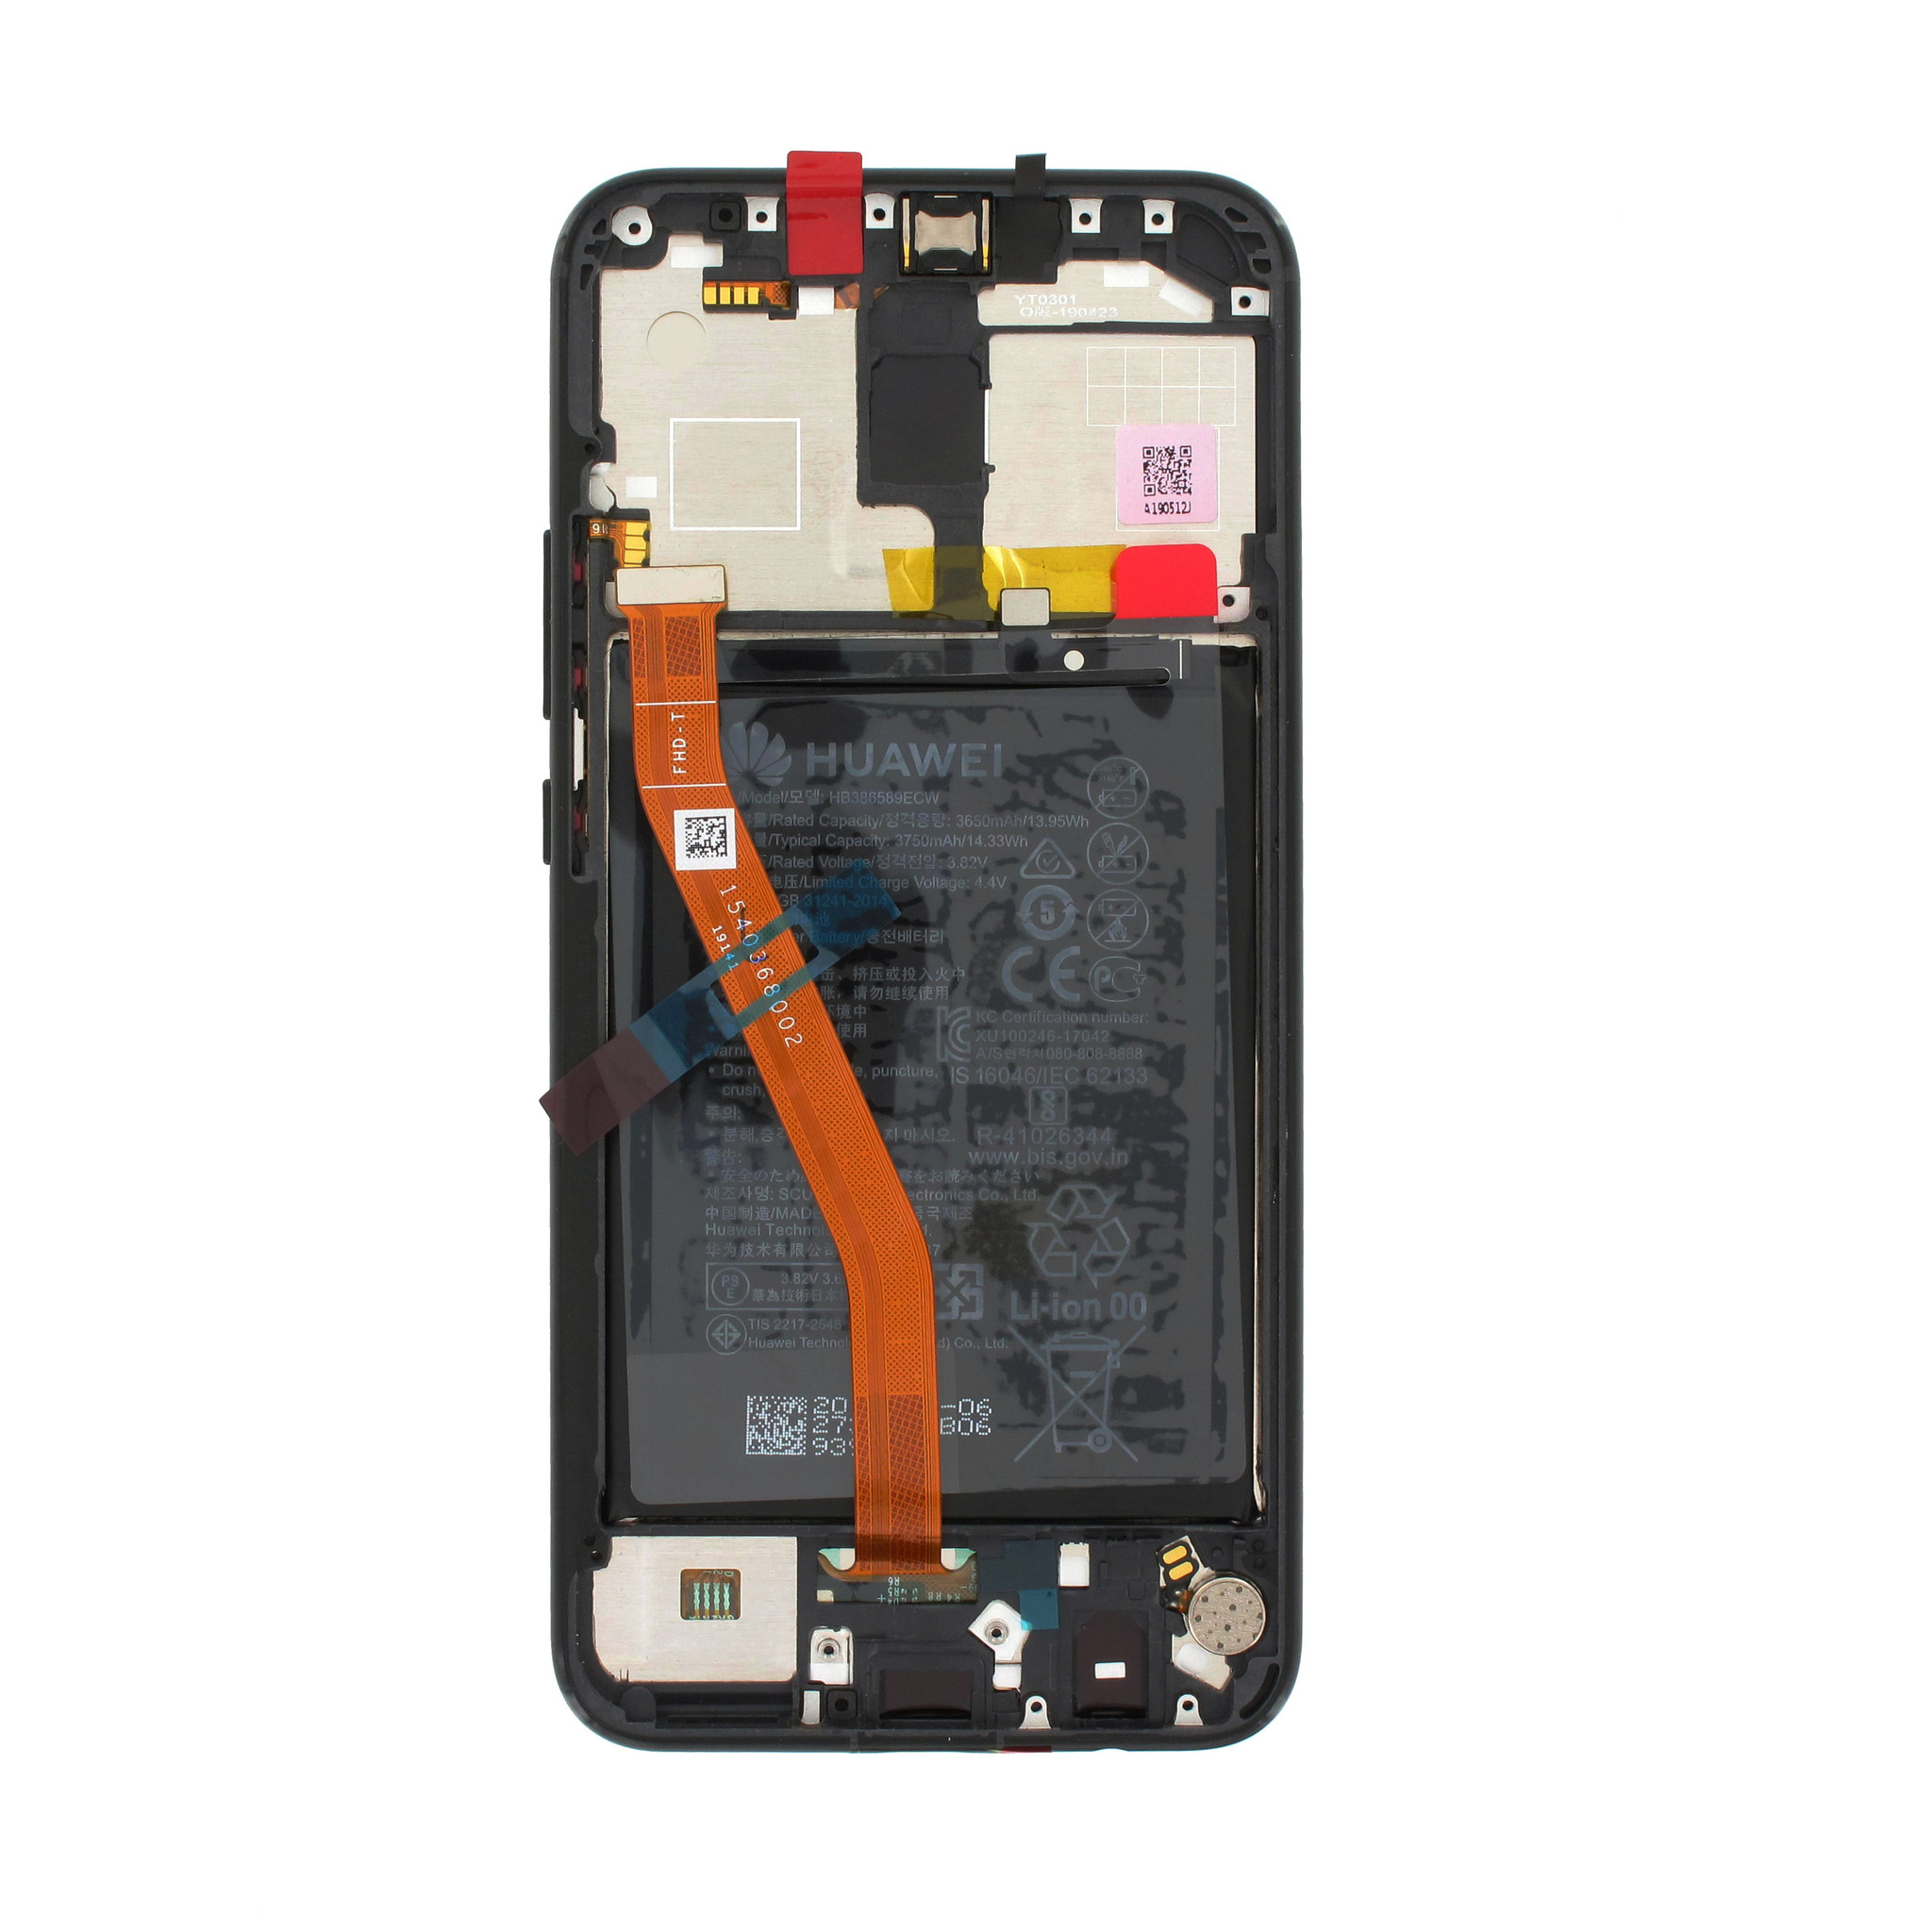 Huawei Mate 20 lite Display, Incl. Battery HB386589ECW, Parts4GSM